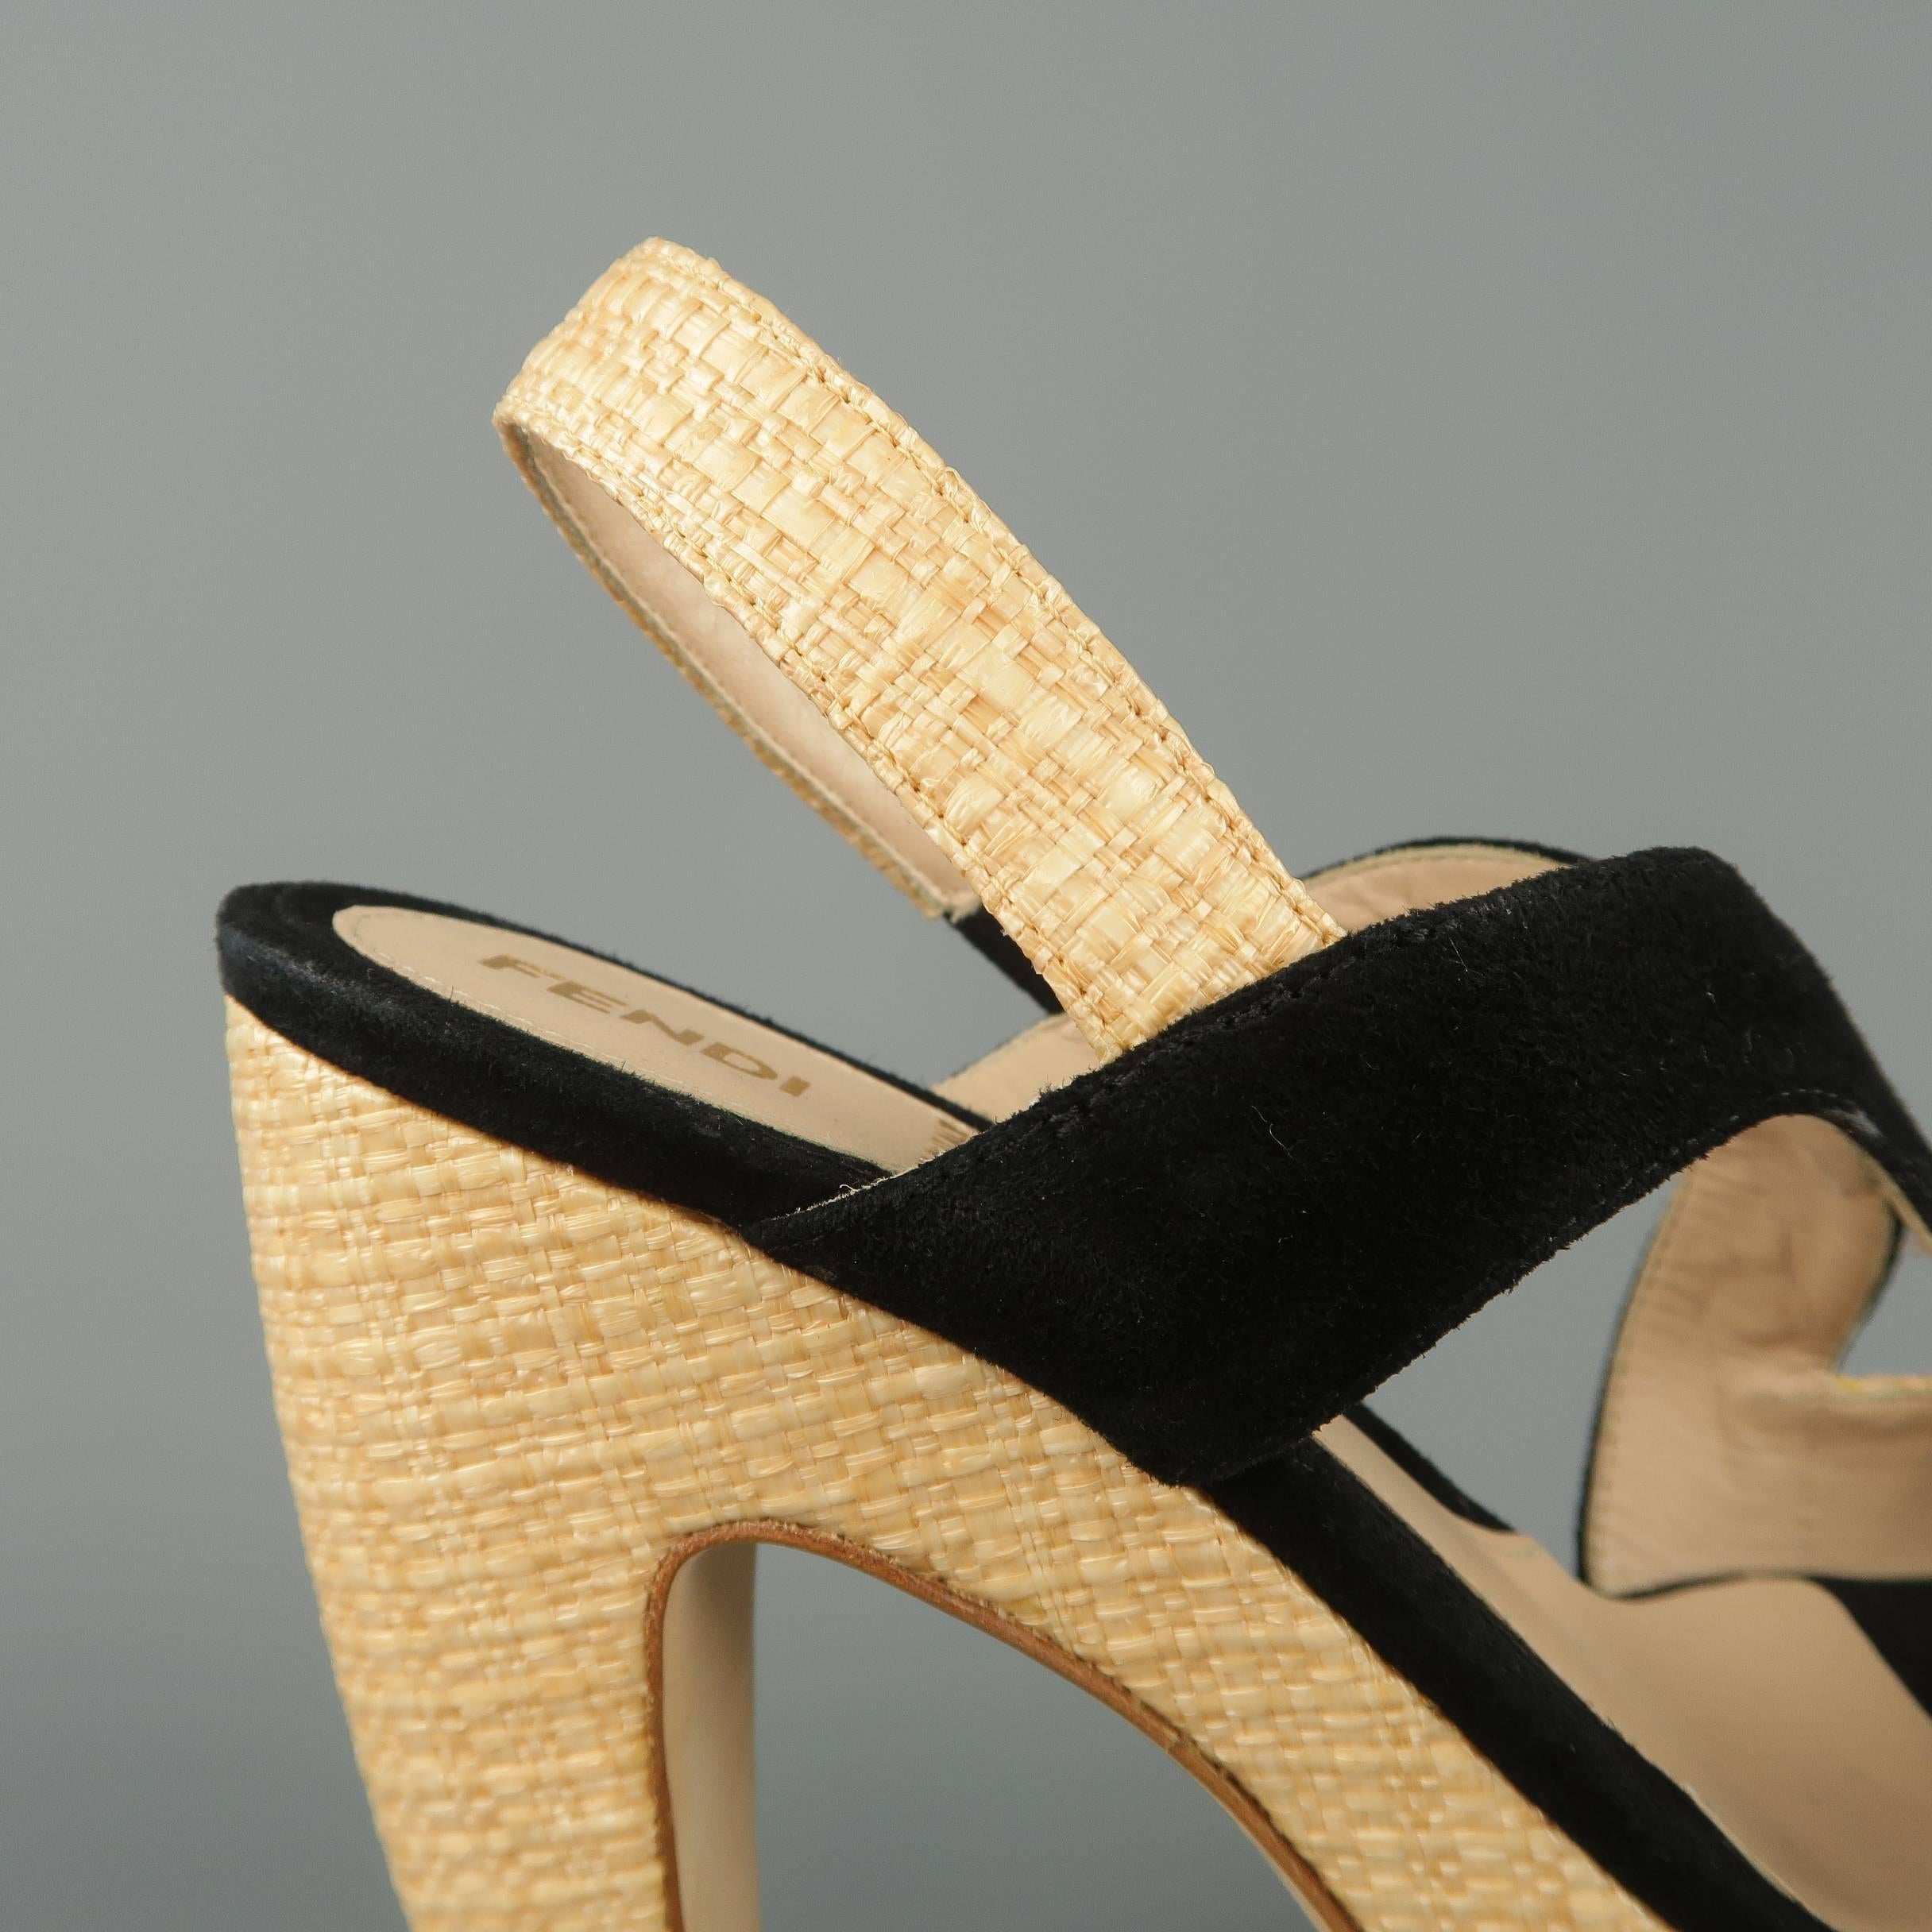 FENDI sandals come in light beige woven raffia material with a peep toe, curved black suede straps, slingback, and chunky covered heel and platform. Made in Italy.
 
Excellent Pre-Owned Condition.
Marked: IT 35.5
 
Measurements:
 
Heel: 5